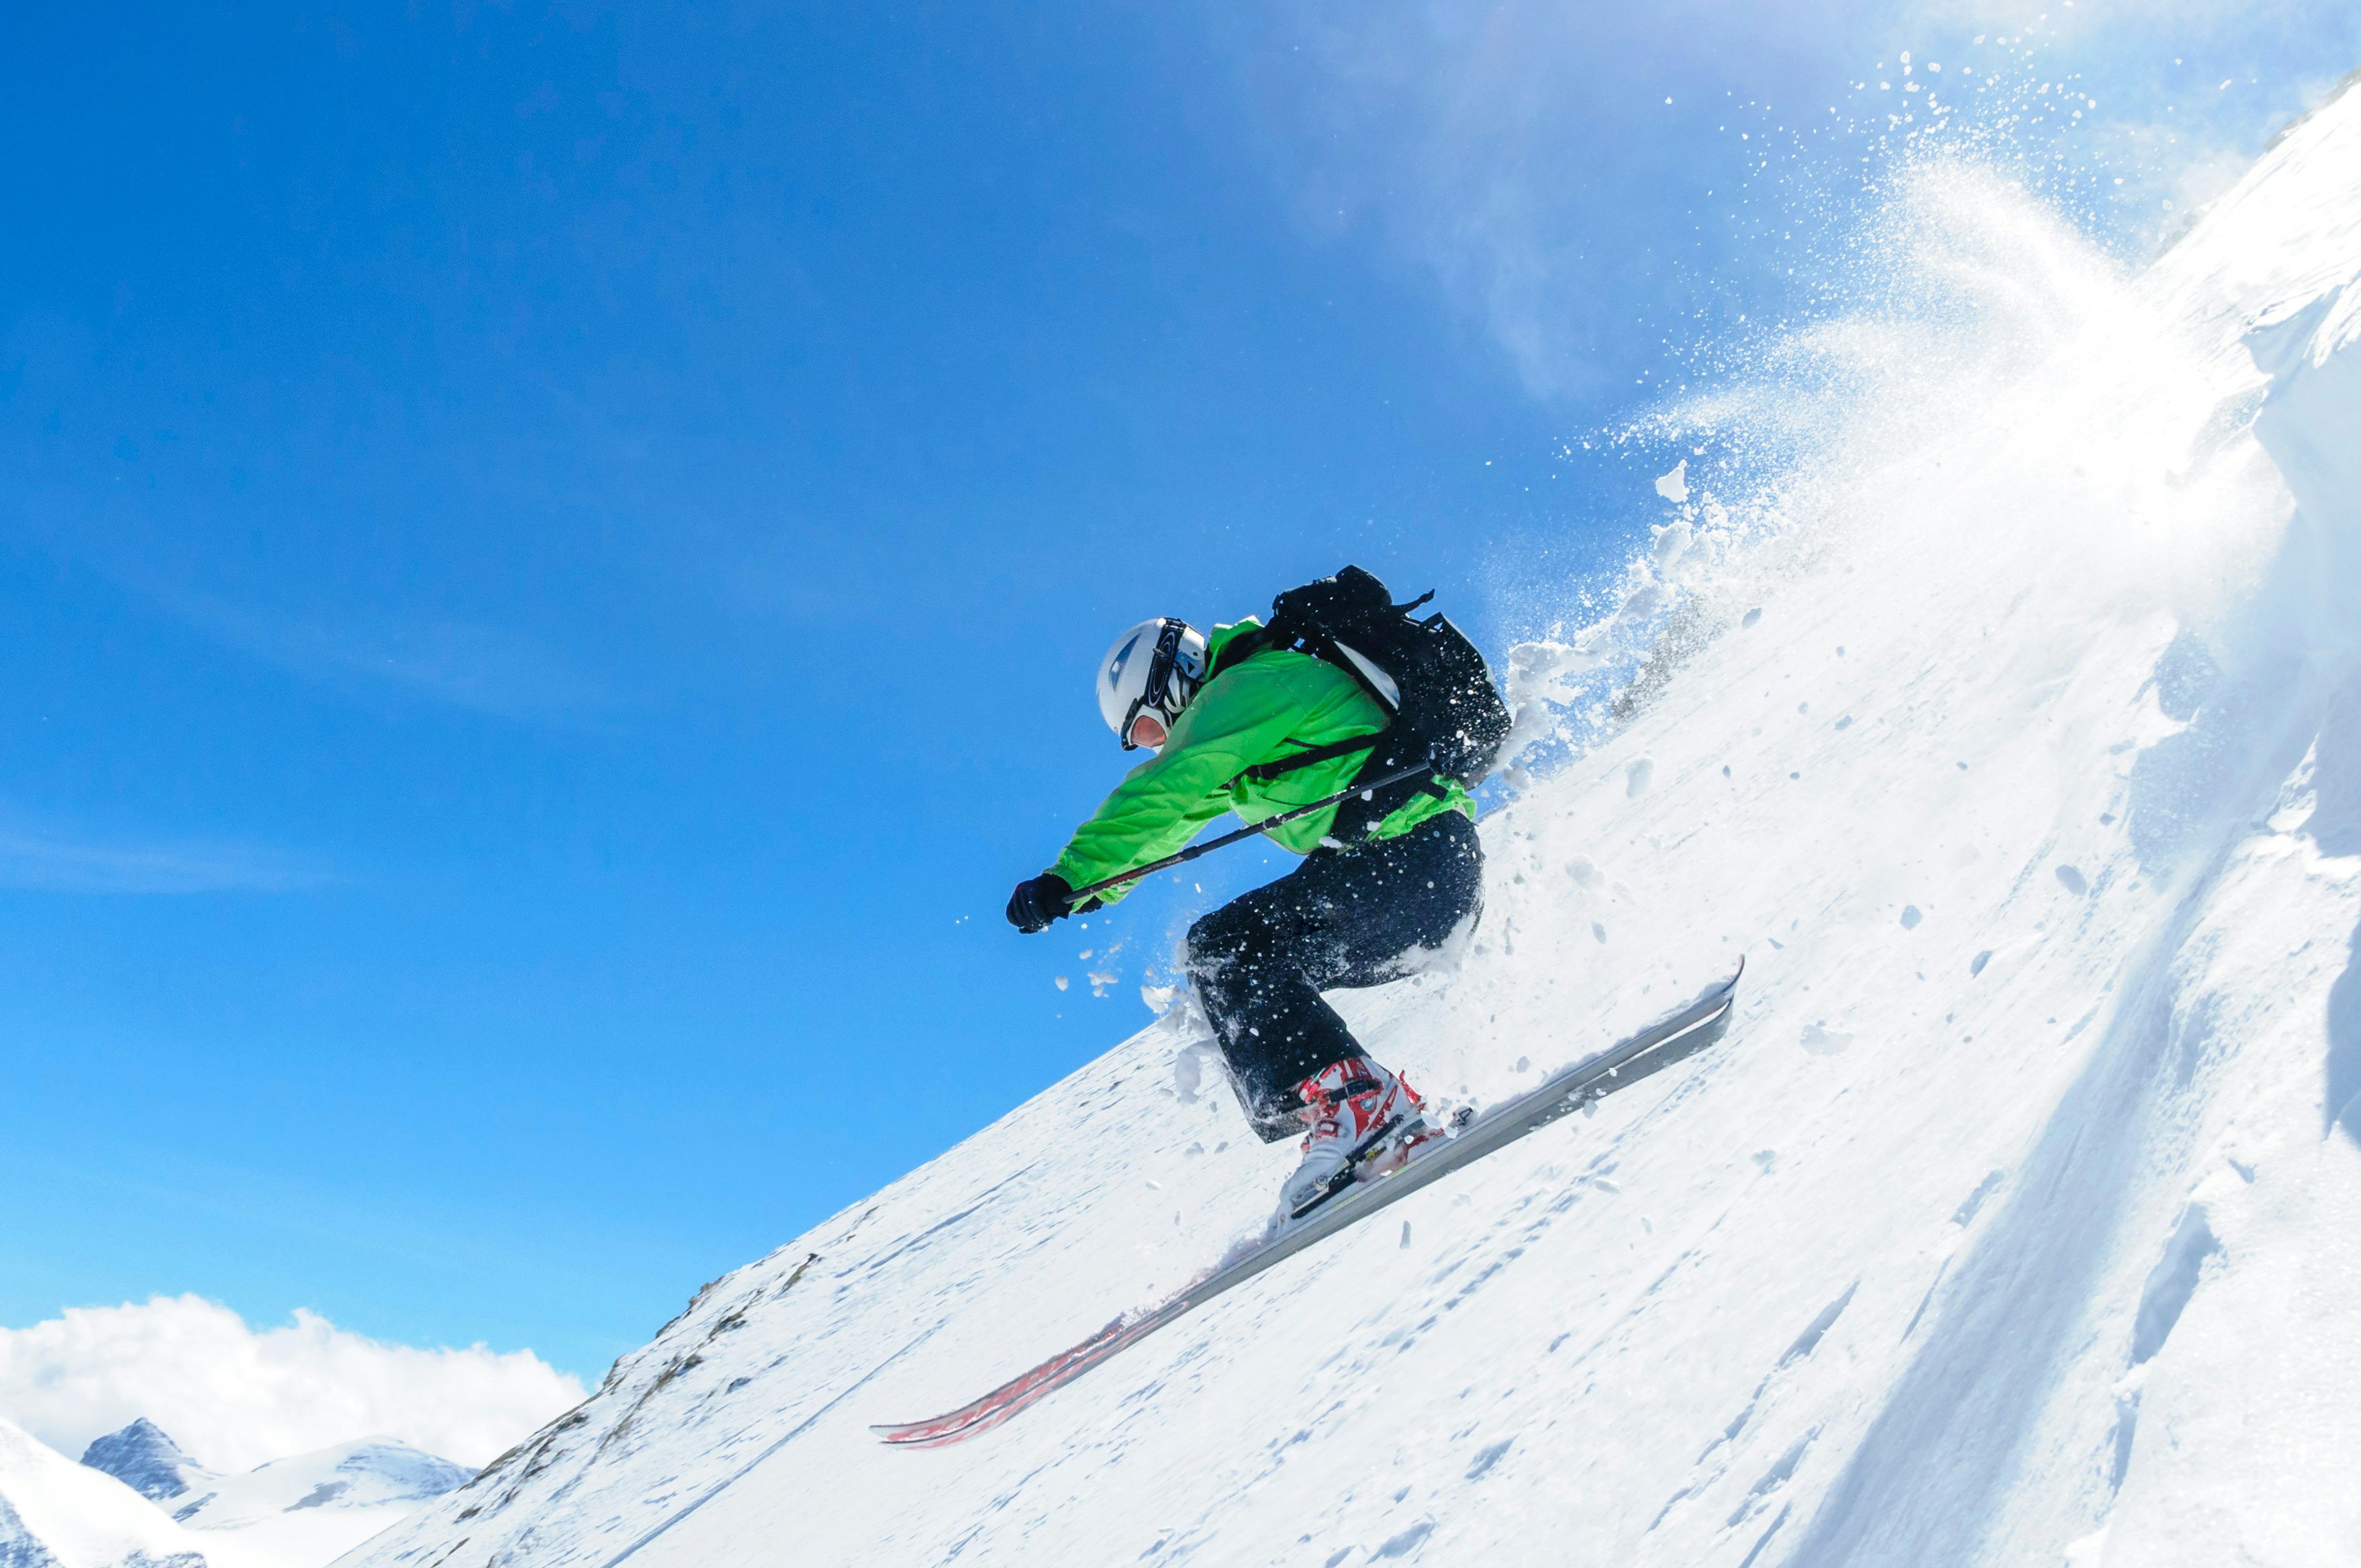 A skier goes downhill surrounded by snow